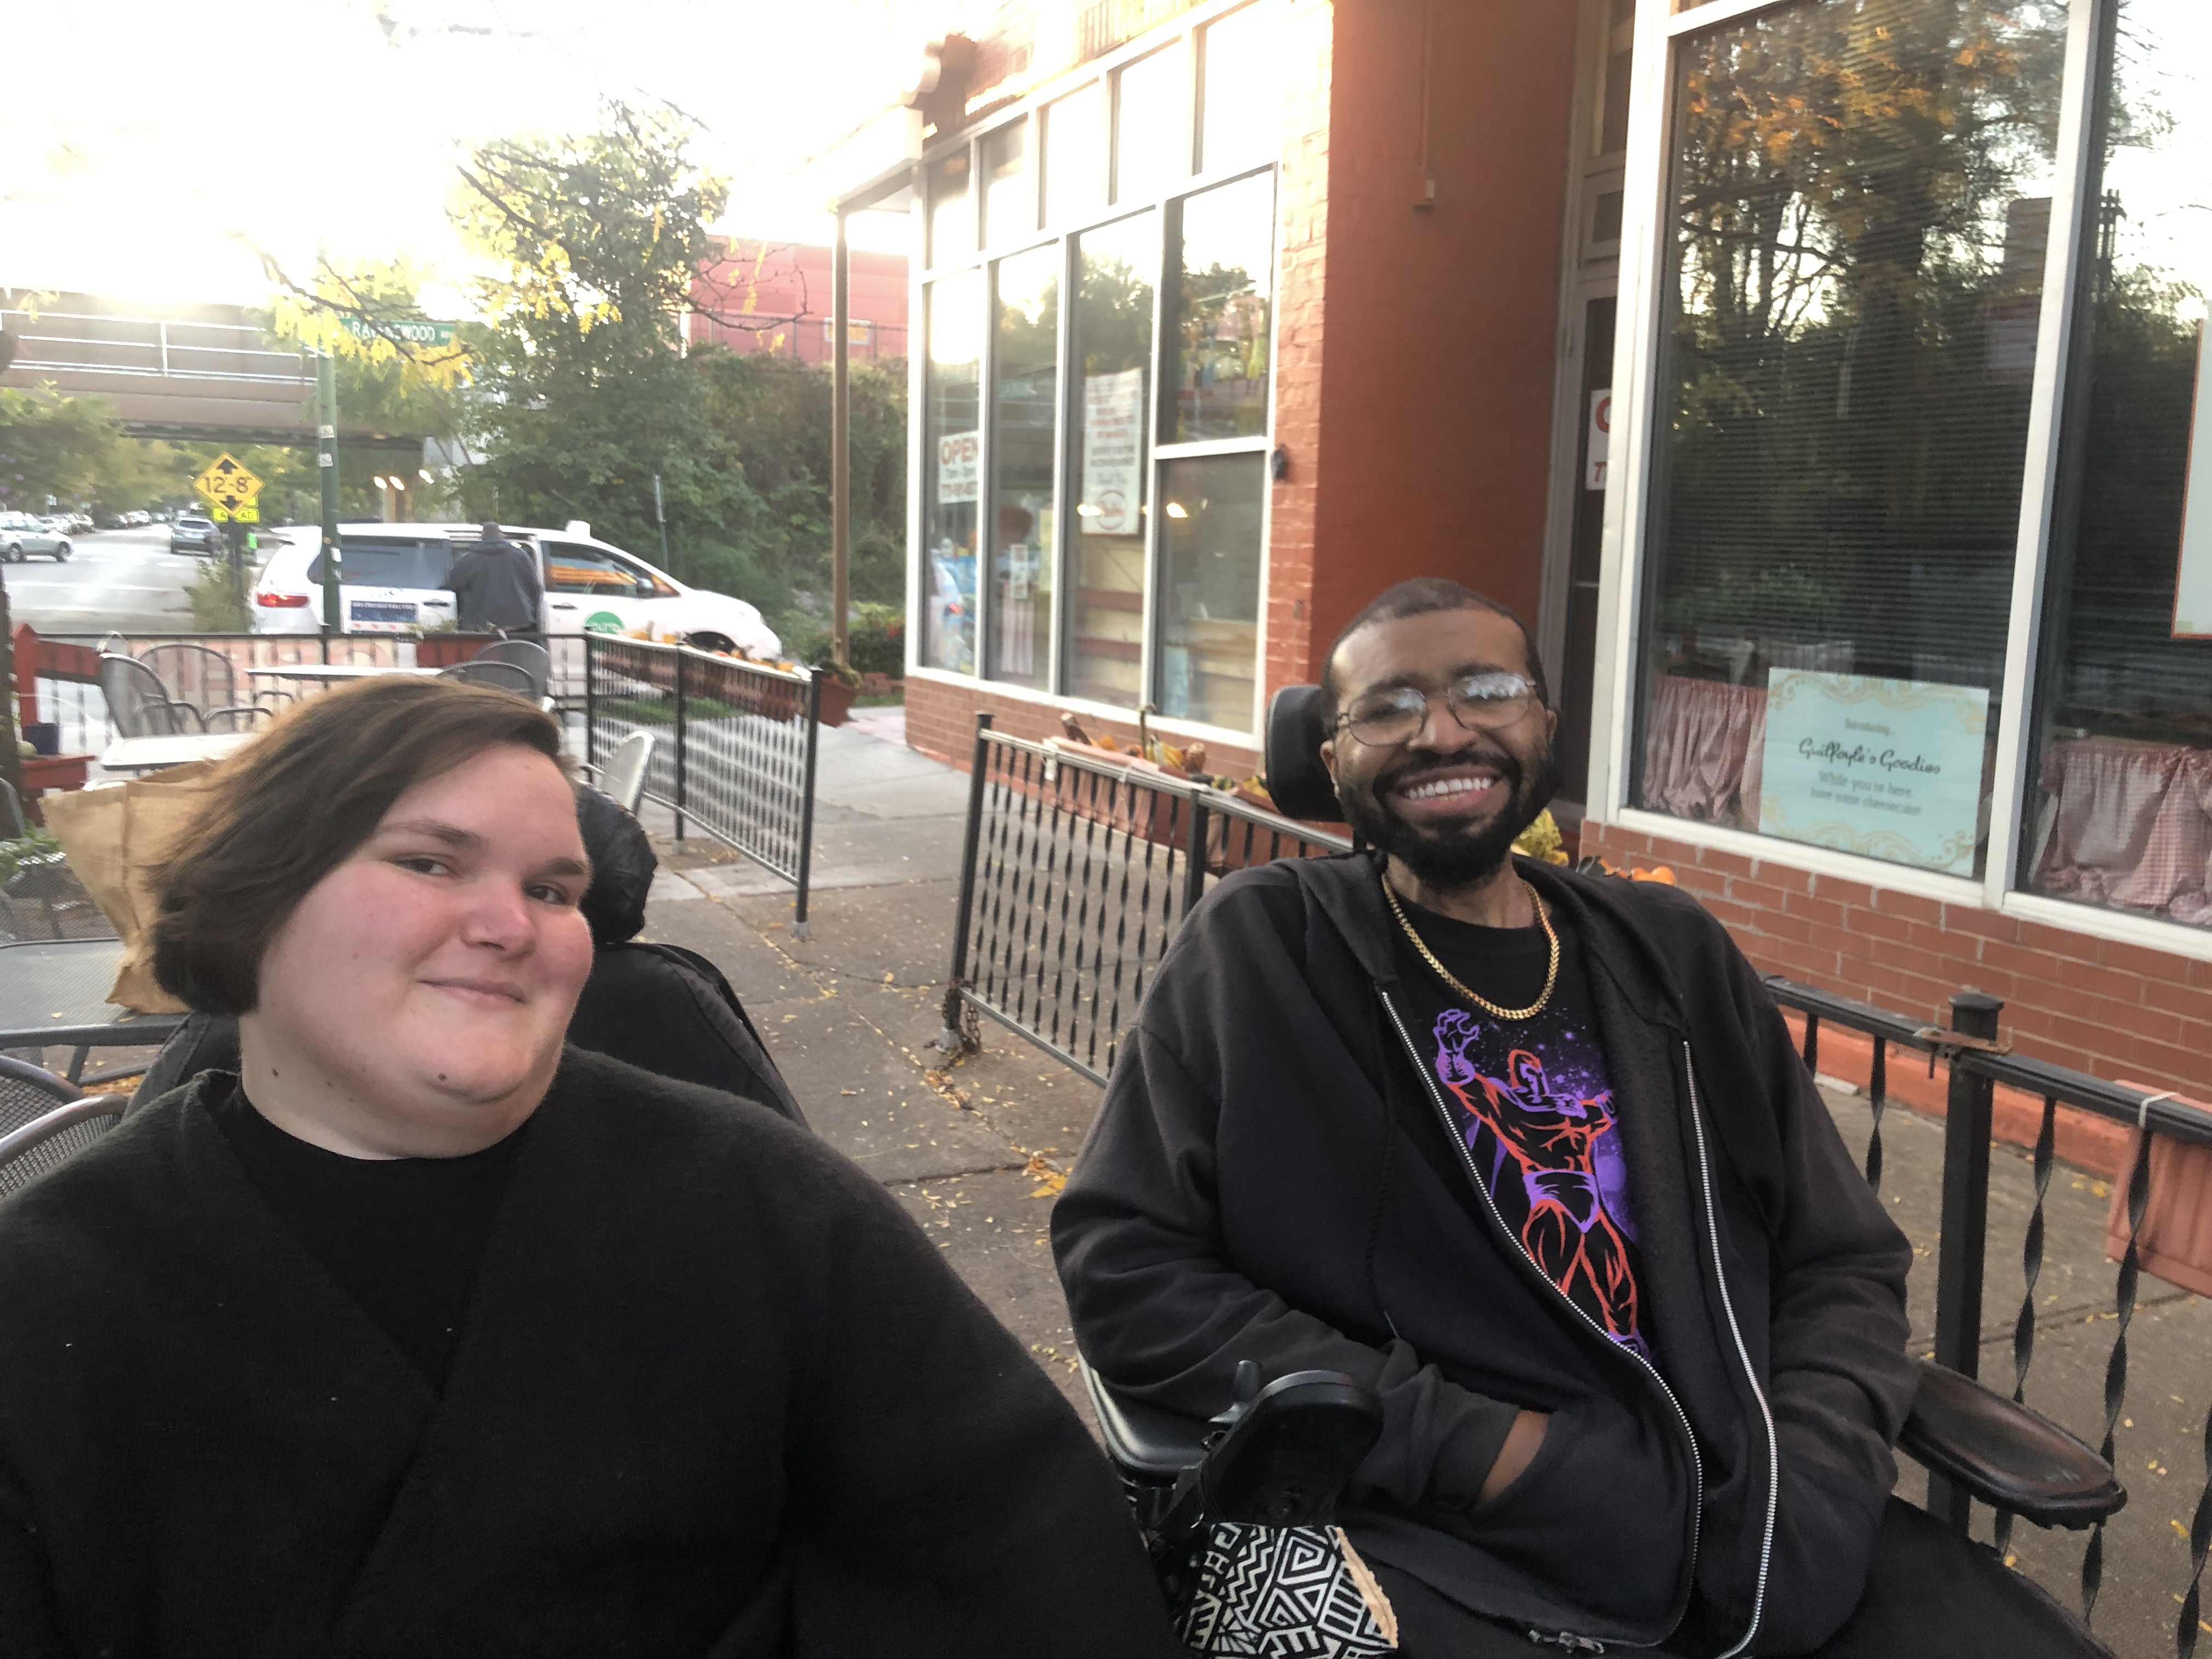 Kennedy, a white, fat, femme, and Justin, a Black man smile at the camera at an outdoor event. They both are dressed in black fall clothing and are seated in their power wheelchairs.